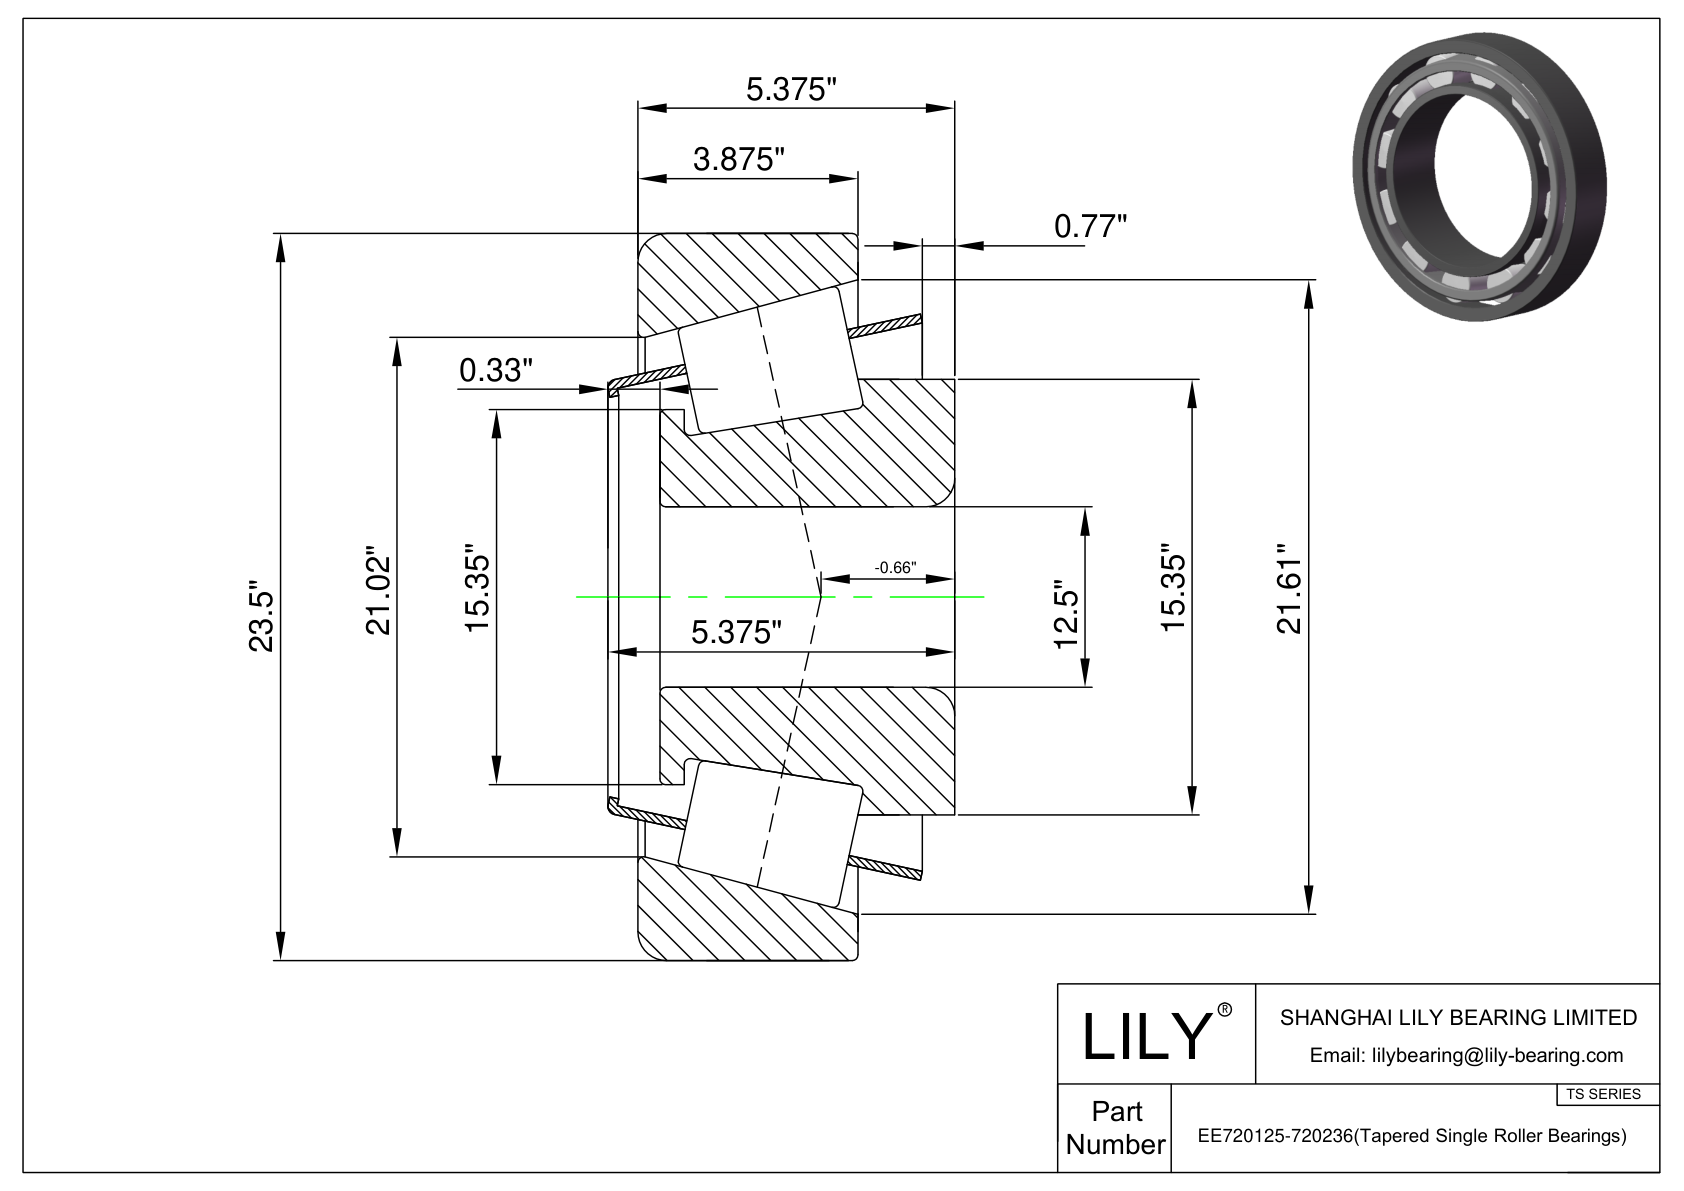 EE720125-720236 TS (Tapered Single Roller Bearings) (Imperial) cad drawing